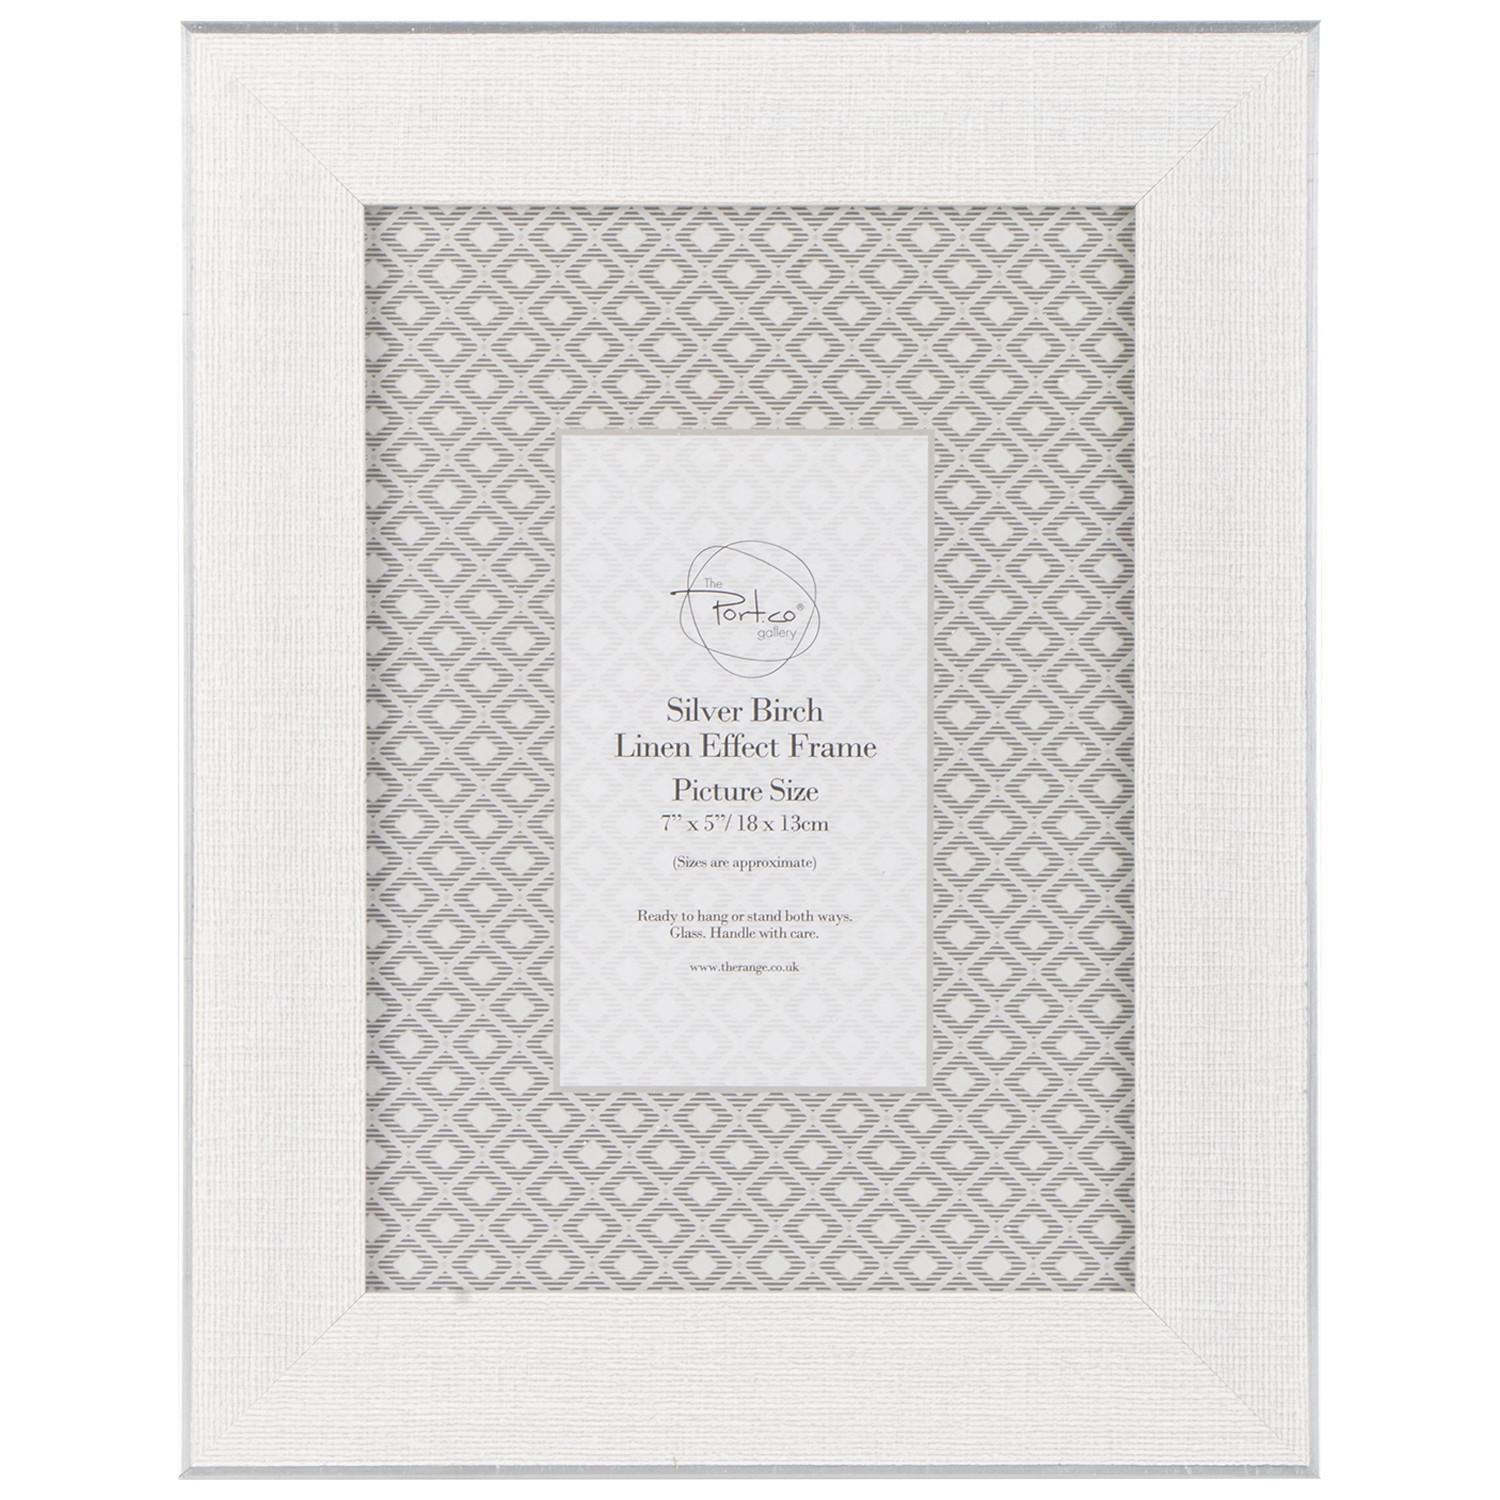 The Port Co. Gallery Silver Linen Effect Birch Photo Frame 7 x 5 inch Image